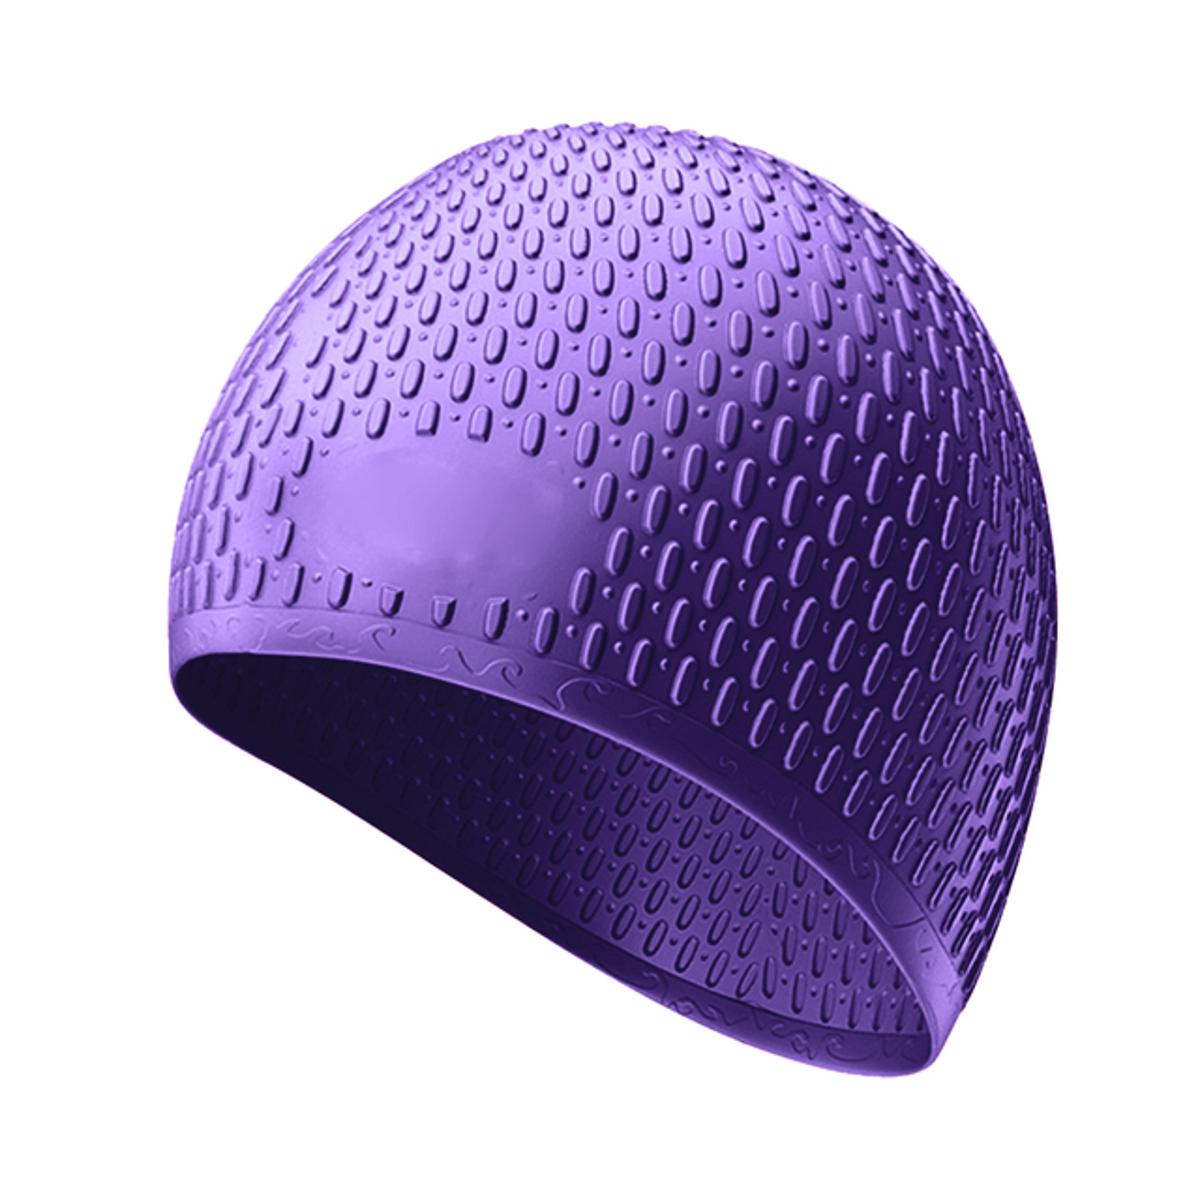 Close-up of the durable First Lens Silicone Adults Swimming Cap in colorful bubble dots.